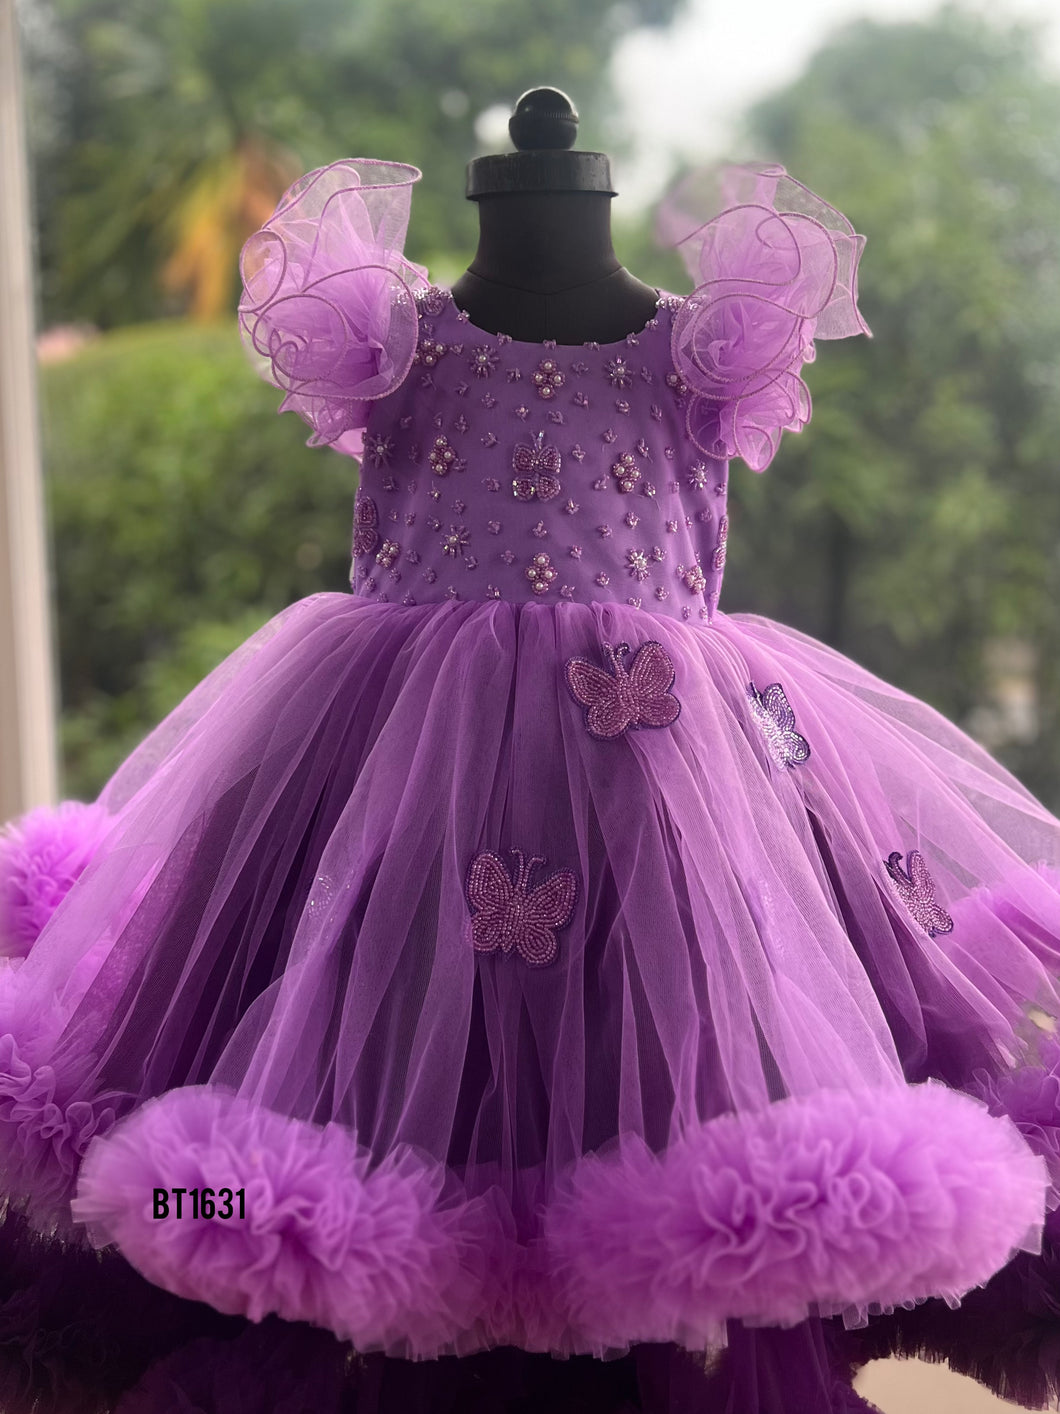 BT1631 Lavender Butterfly Dreams - Majestic Party Frock for Tots